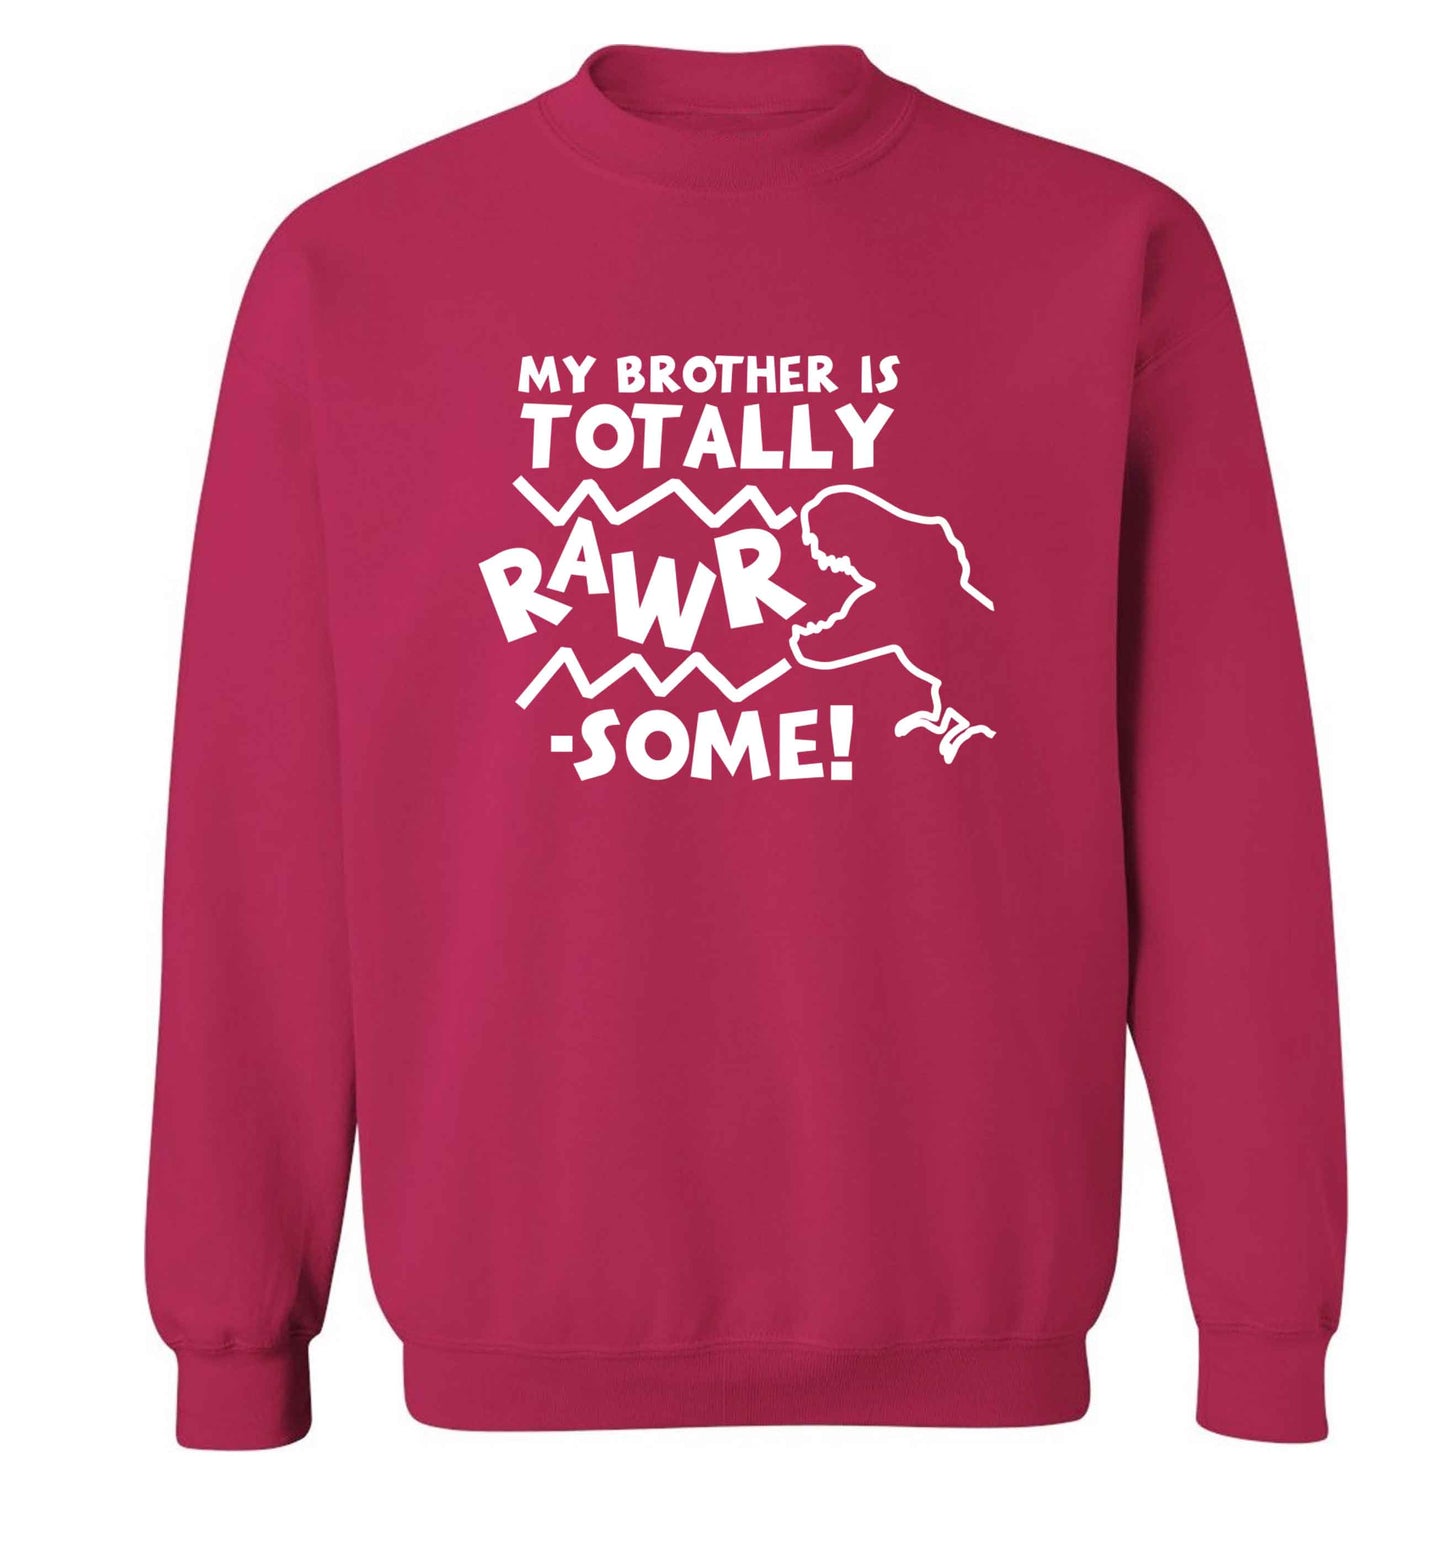 My brother is totally rawrsome adult's unisex pink sweater 2XL